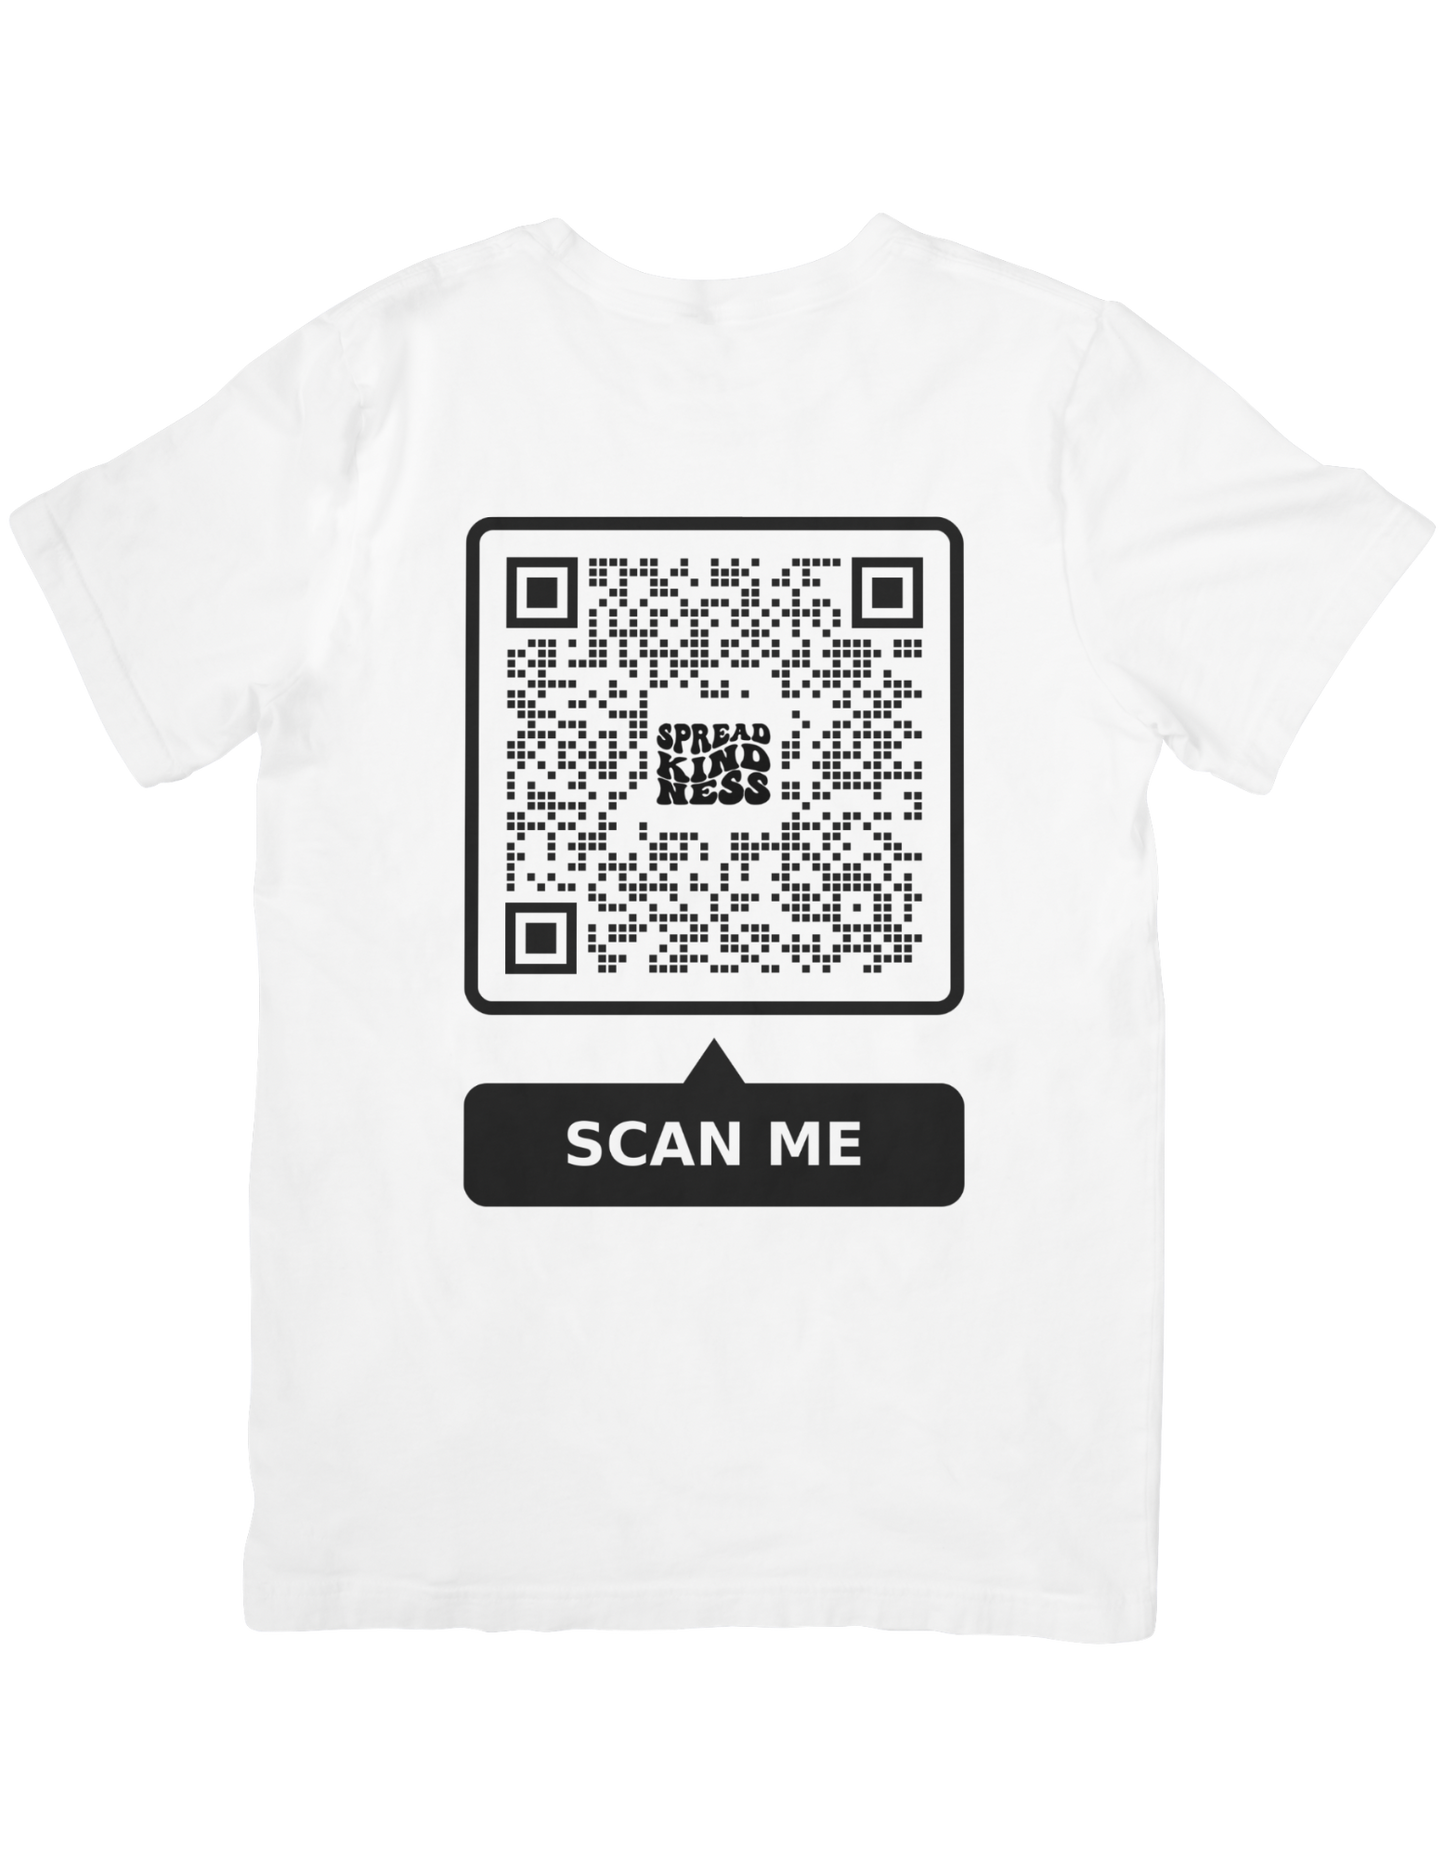 QR code T-Shirt
 “It’s okay to not be okay. Keep going.”